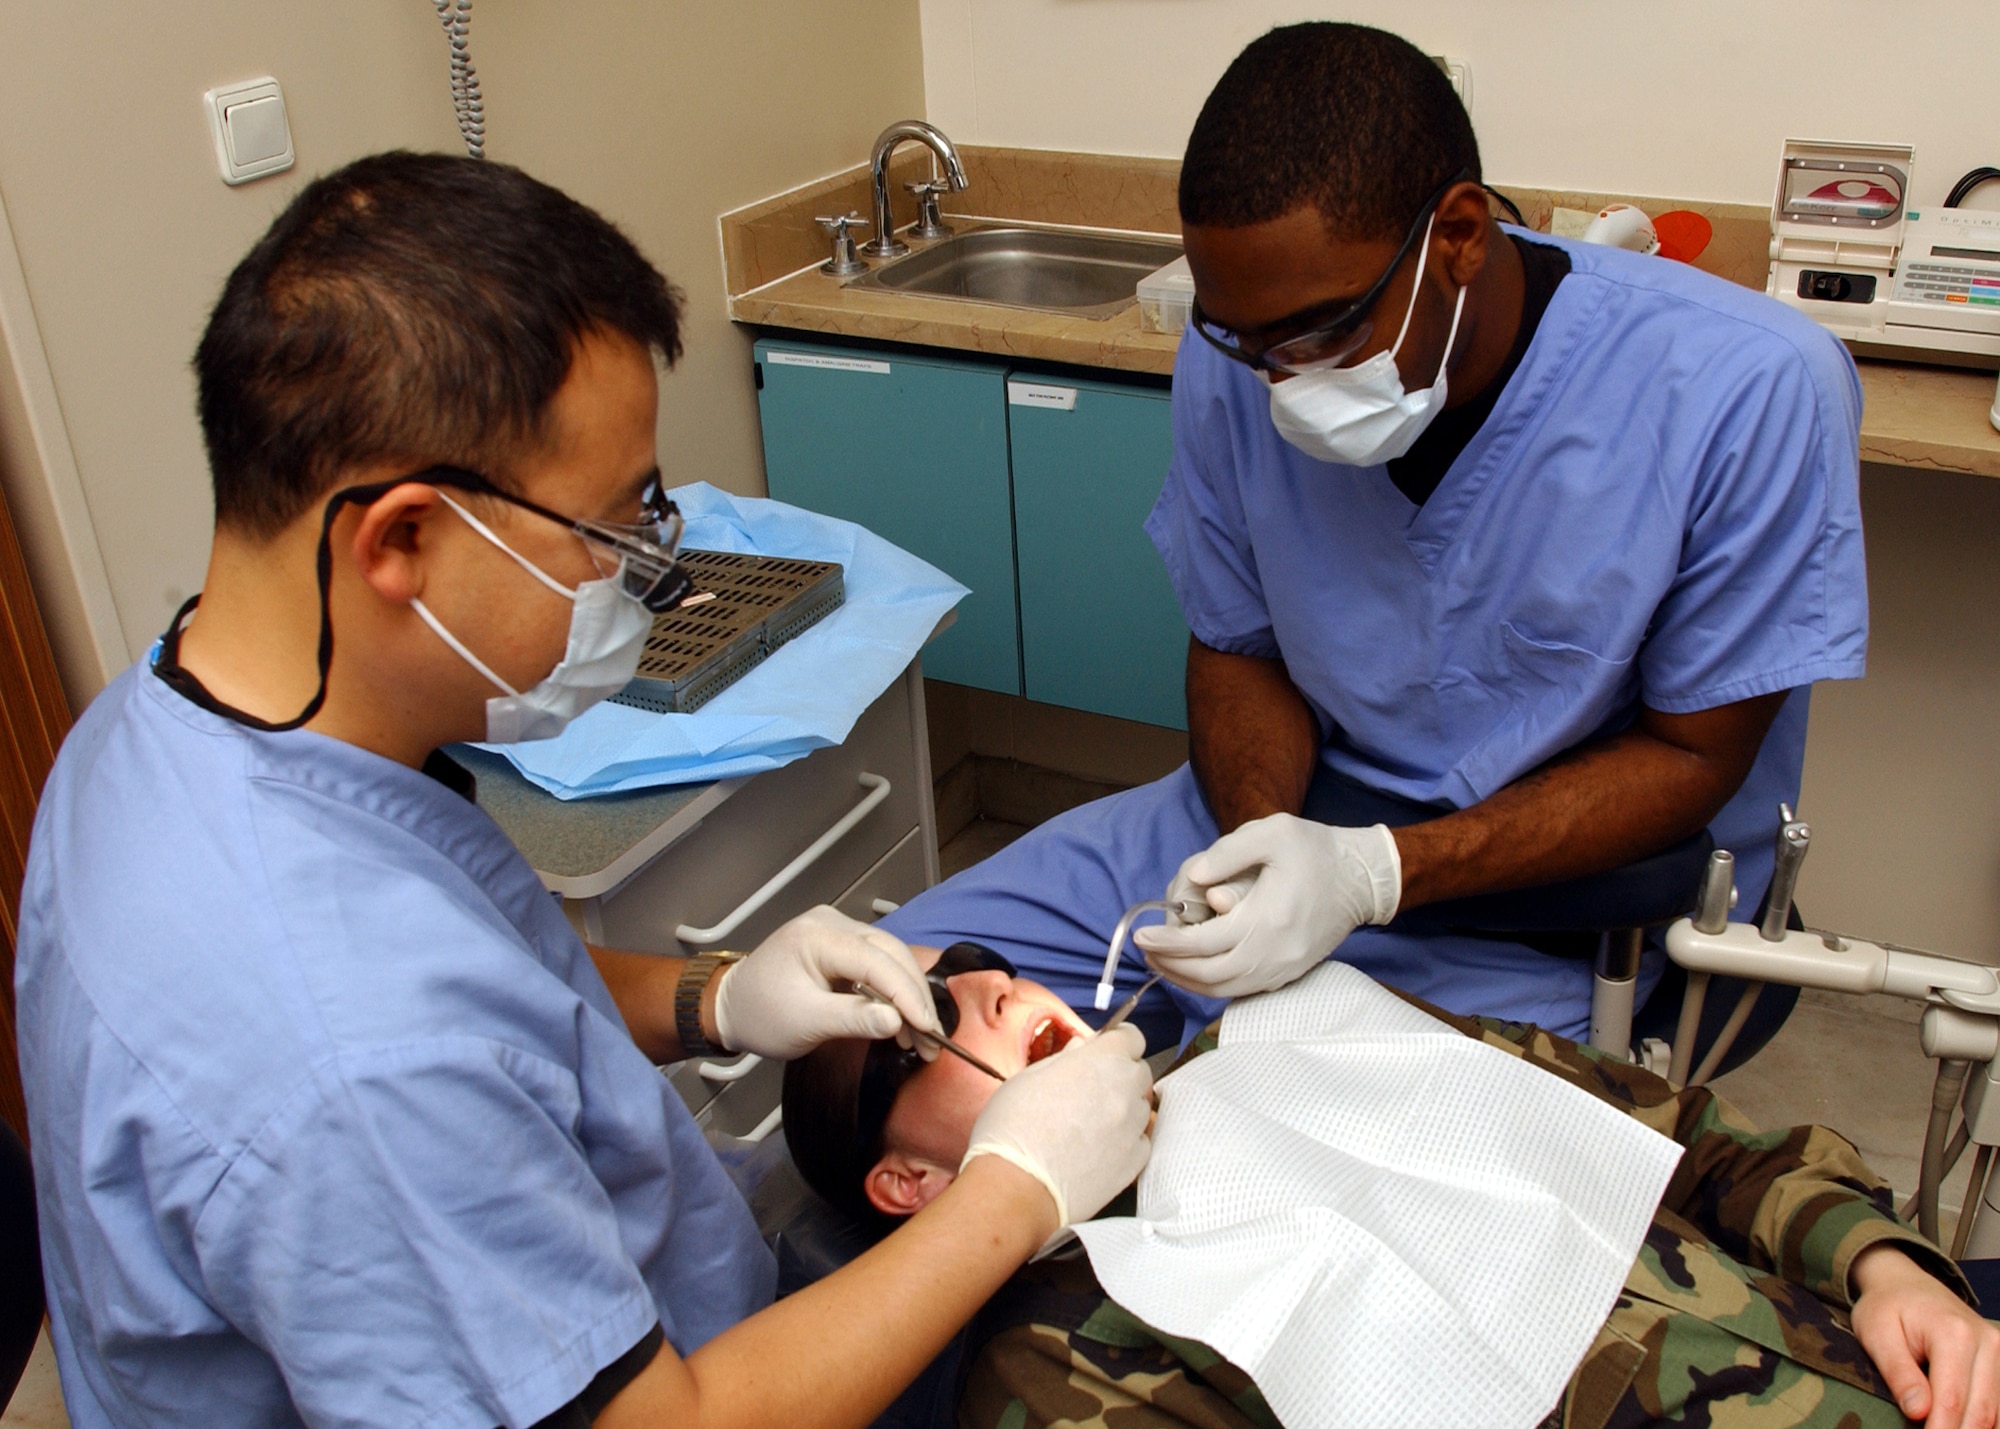 Major Son Vu (left) and SrA Jason Skerritt (right) 39th Medical Group perform a standard check up on SrA Kelly Zaiser 39th Medical Group in incirlik's dental Clinic, 17 May. Routine checkups are curtail to ensure all Airmen are deployment ready. (U.S. Air Force photo by Airman First Class Timothy A. Taylor)